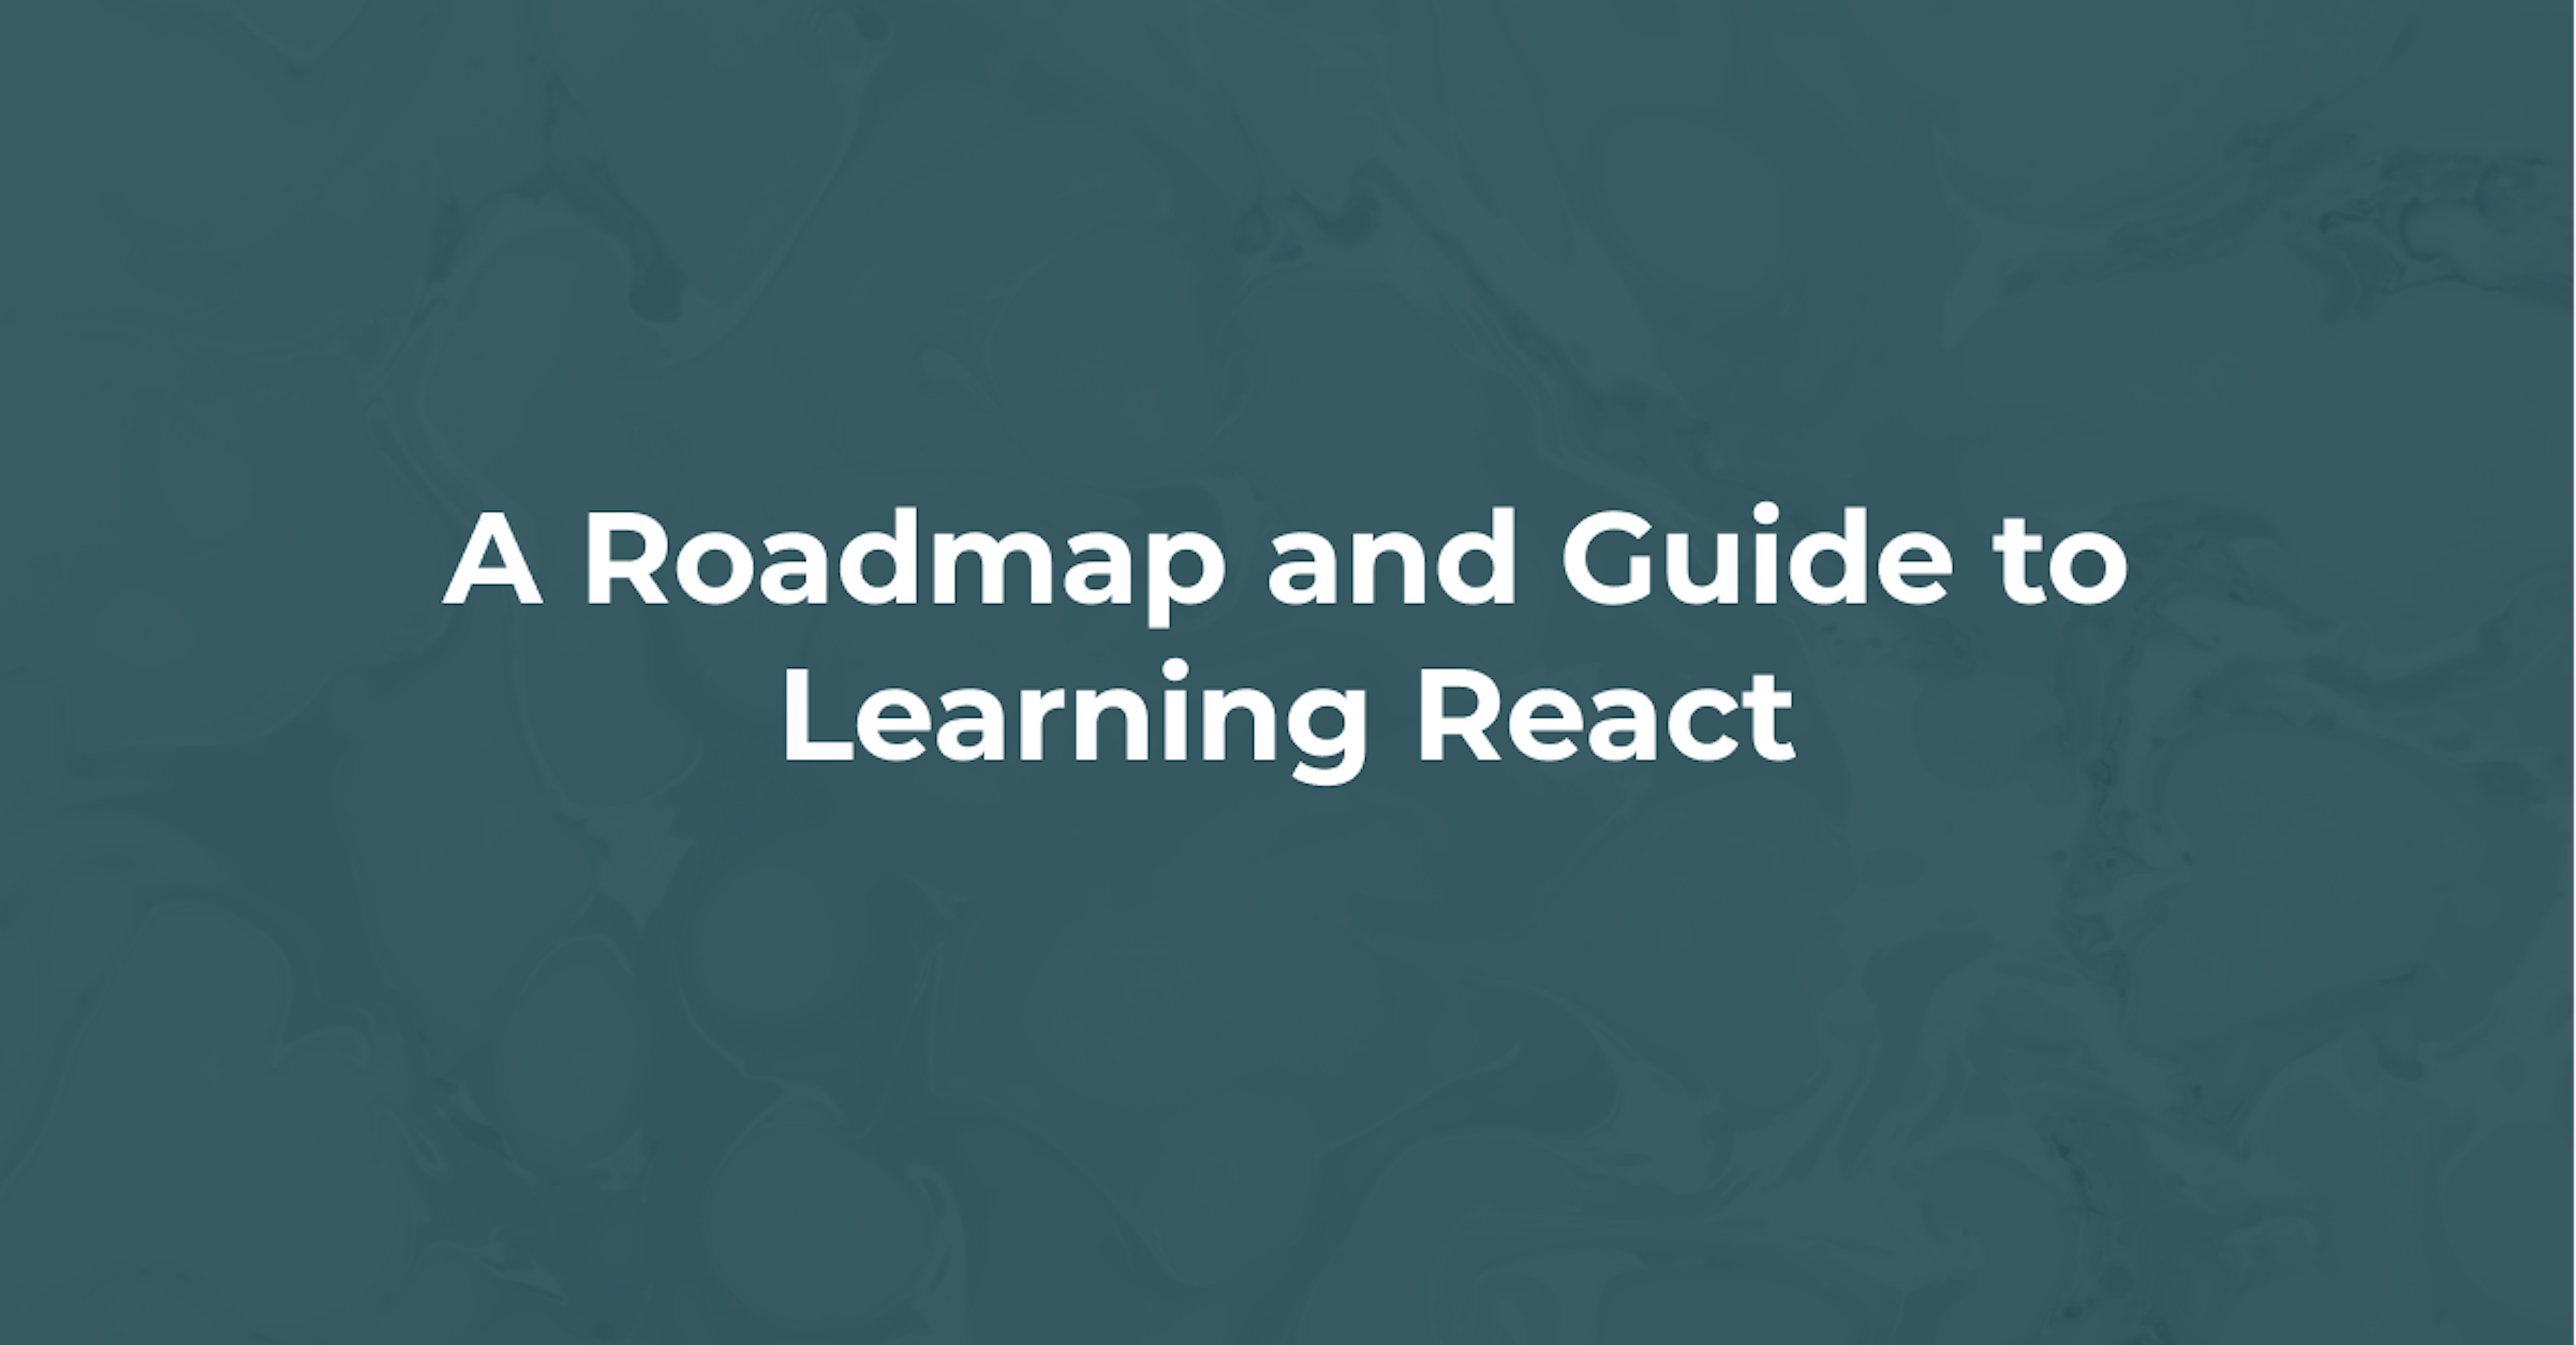 A Roadmap and Guide to Learning React